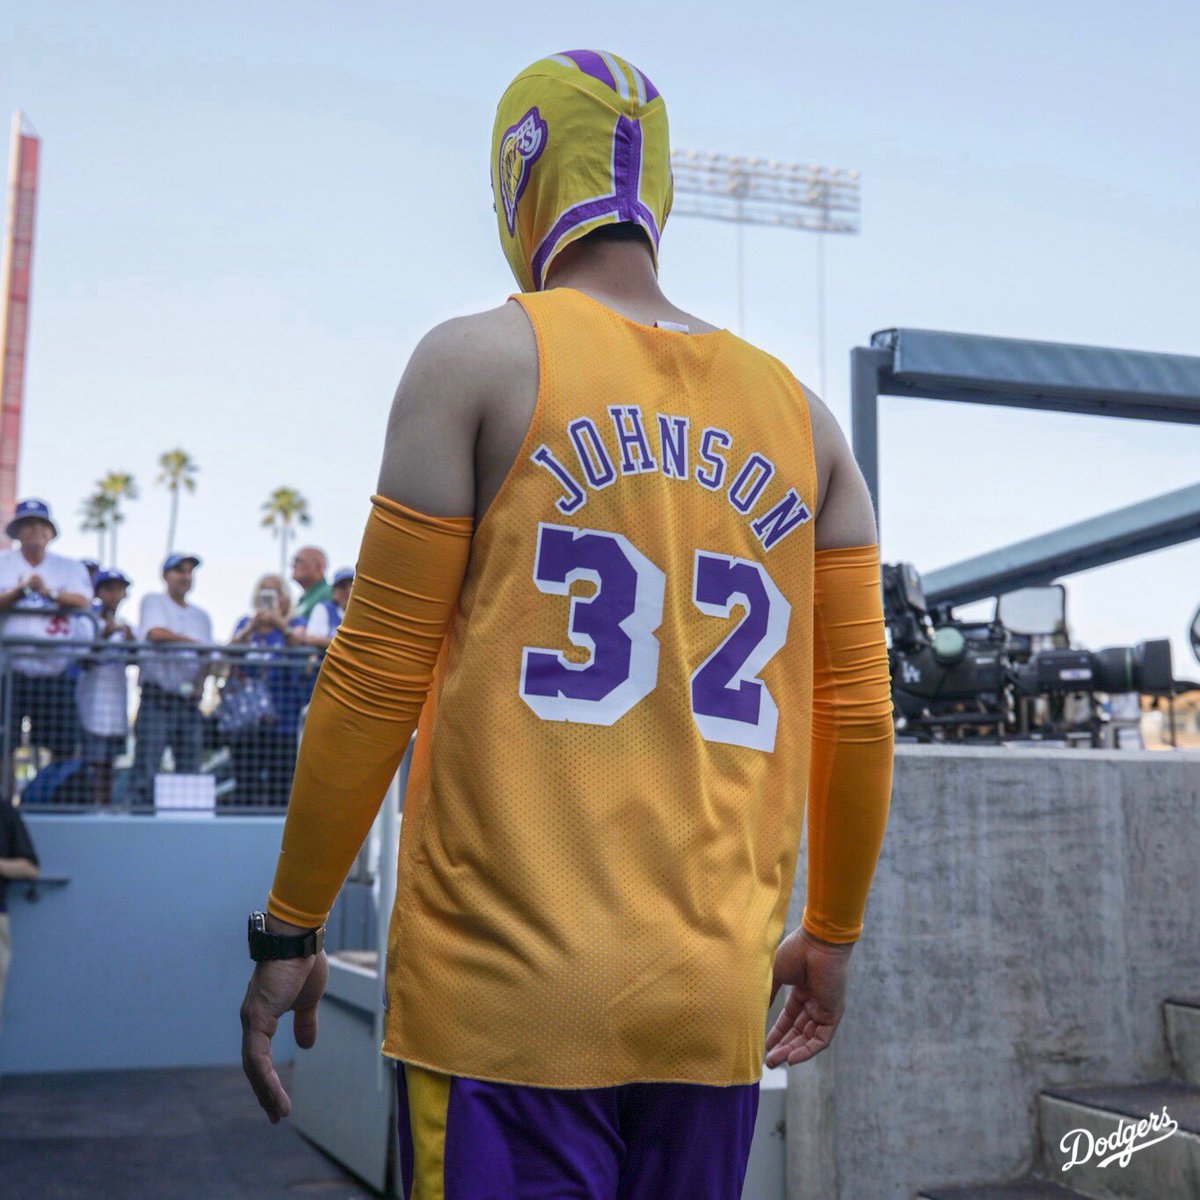 dodgers lakers night jersey